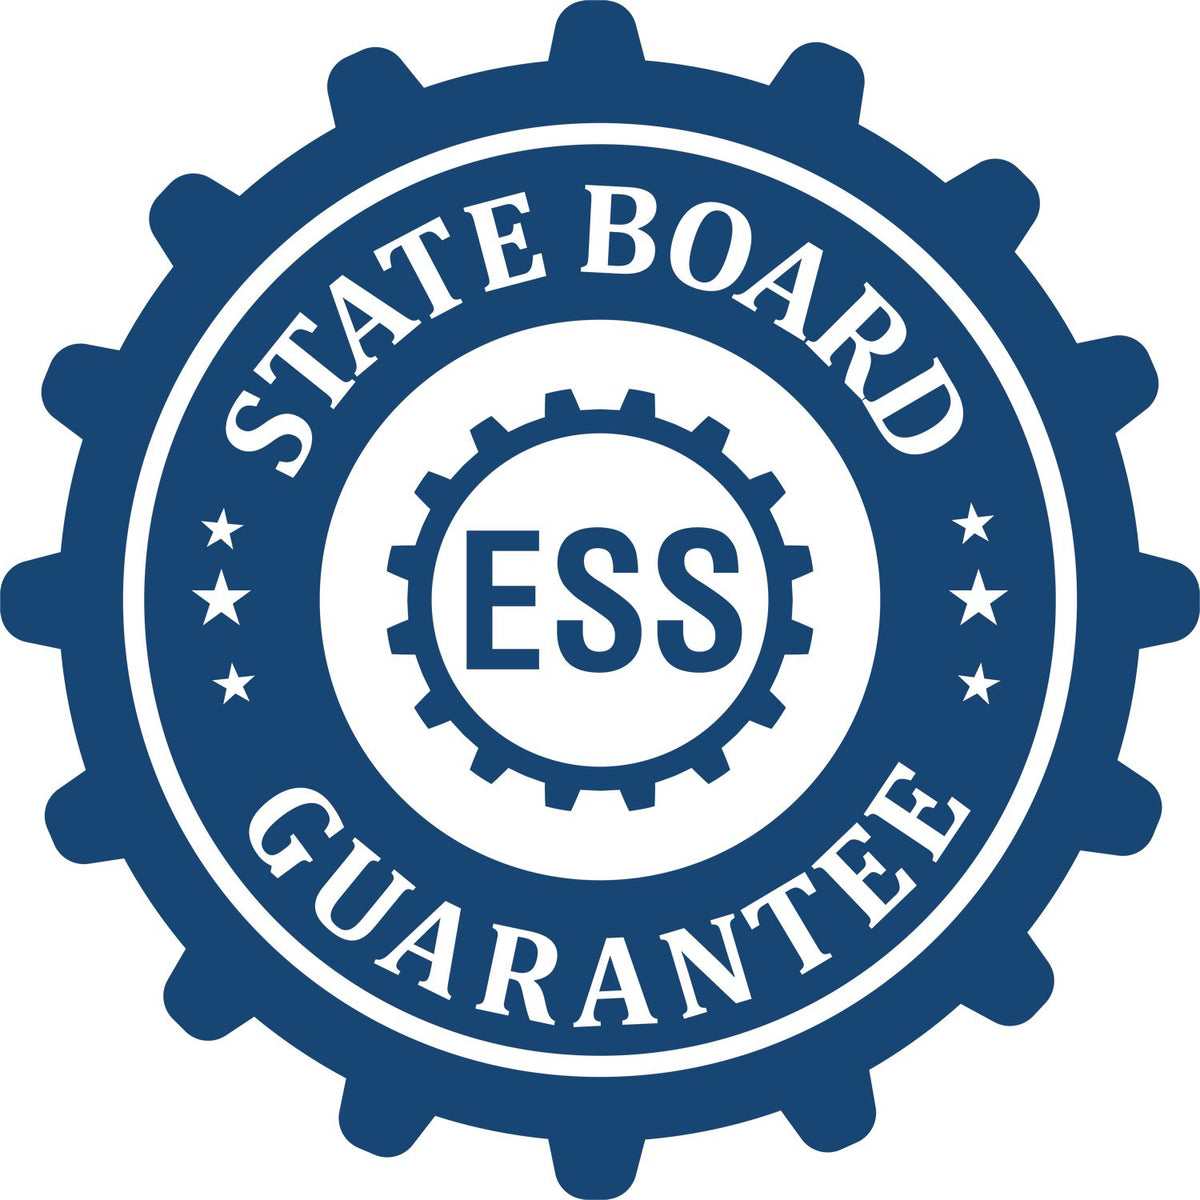 An emblem in a gear shape illustrating a state board guarantee for the Alabama Engineer Desk Seal product.